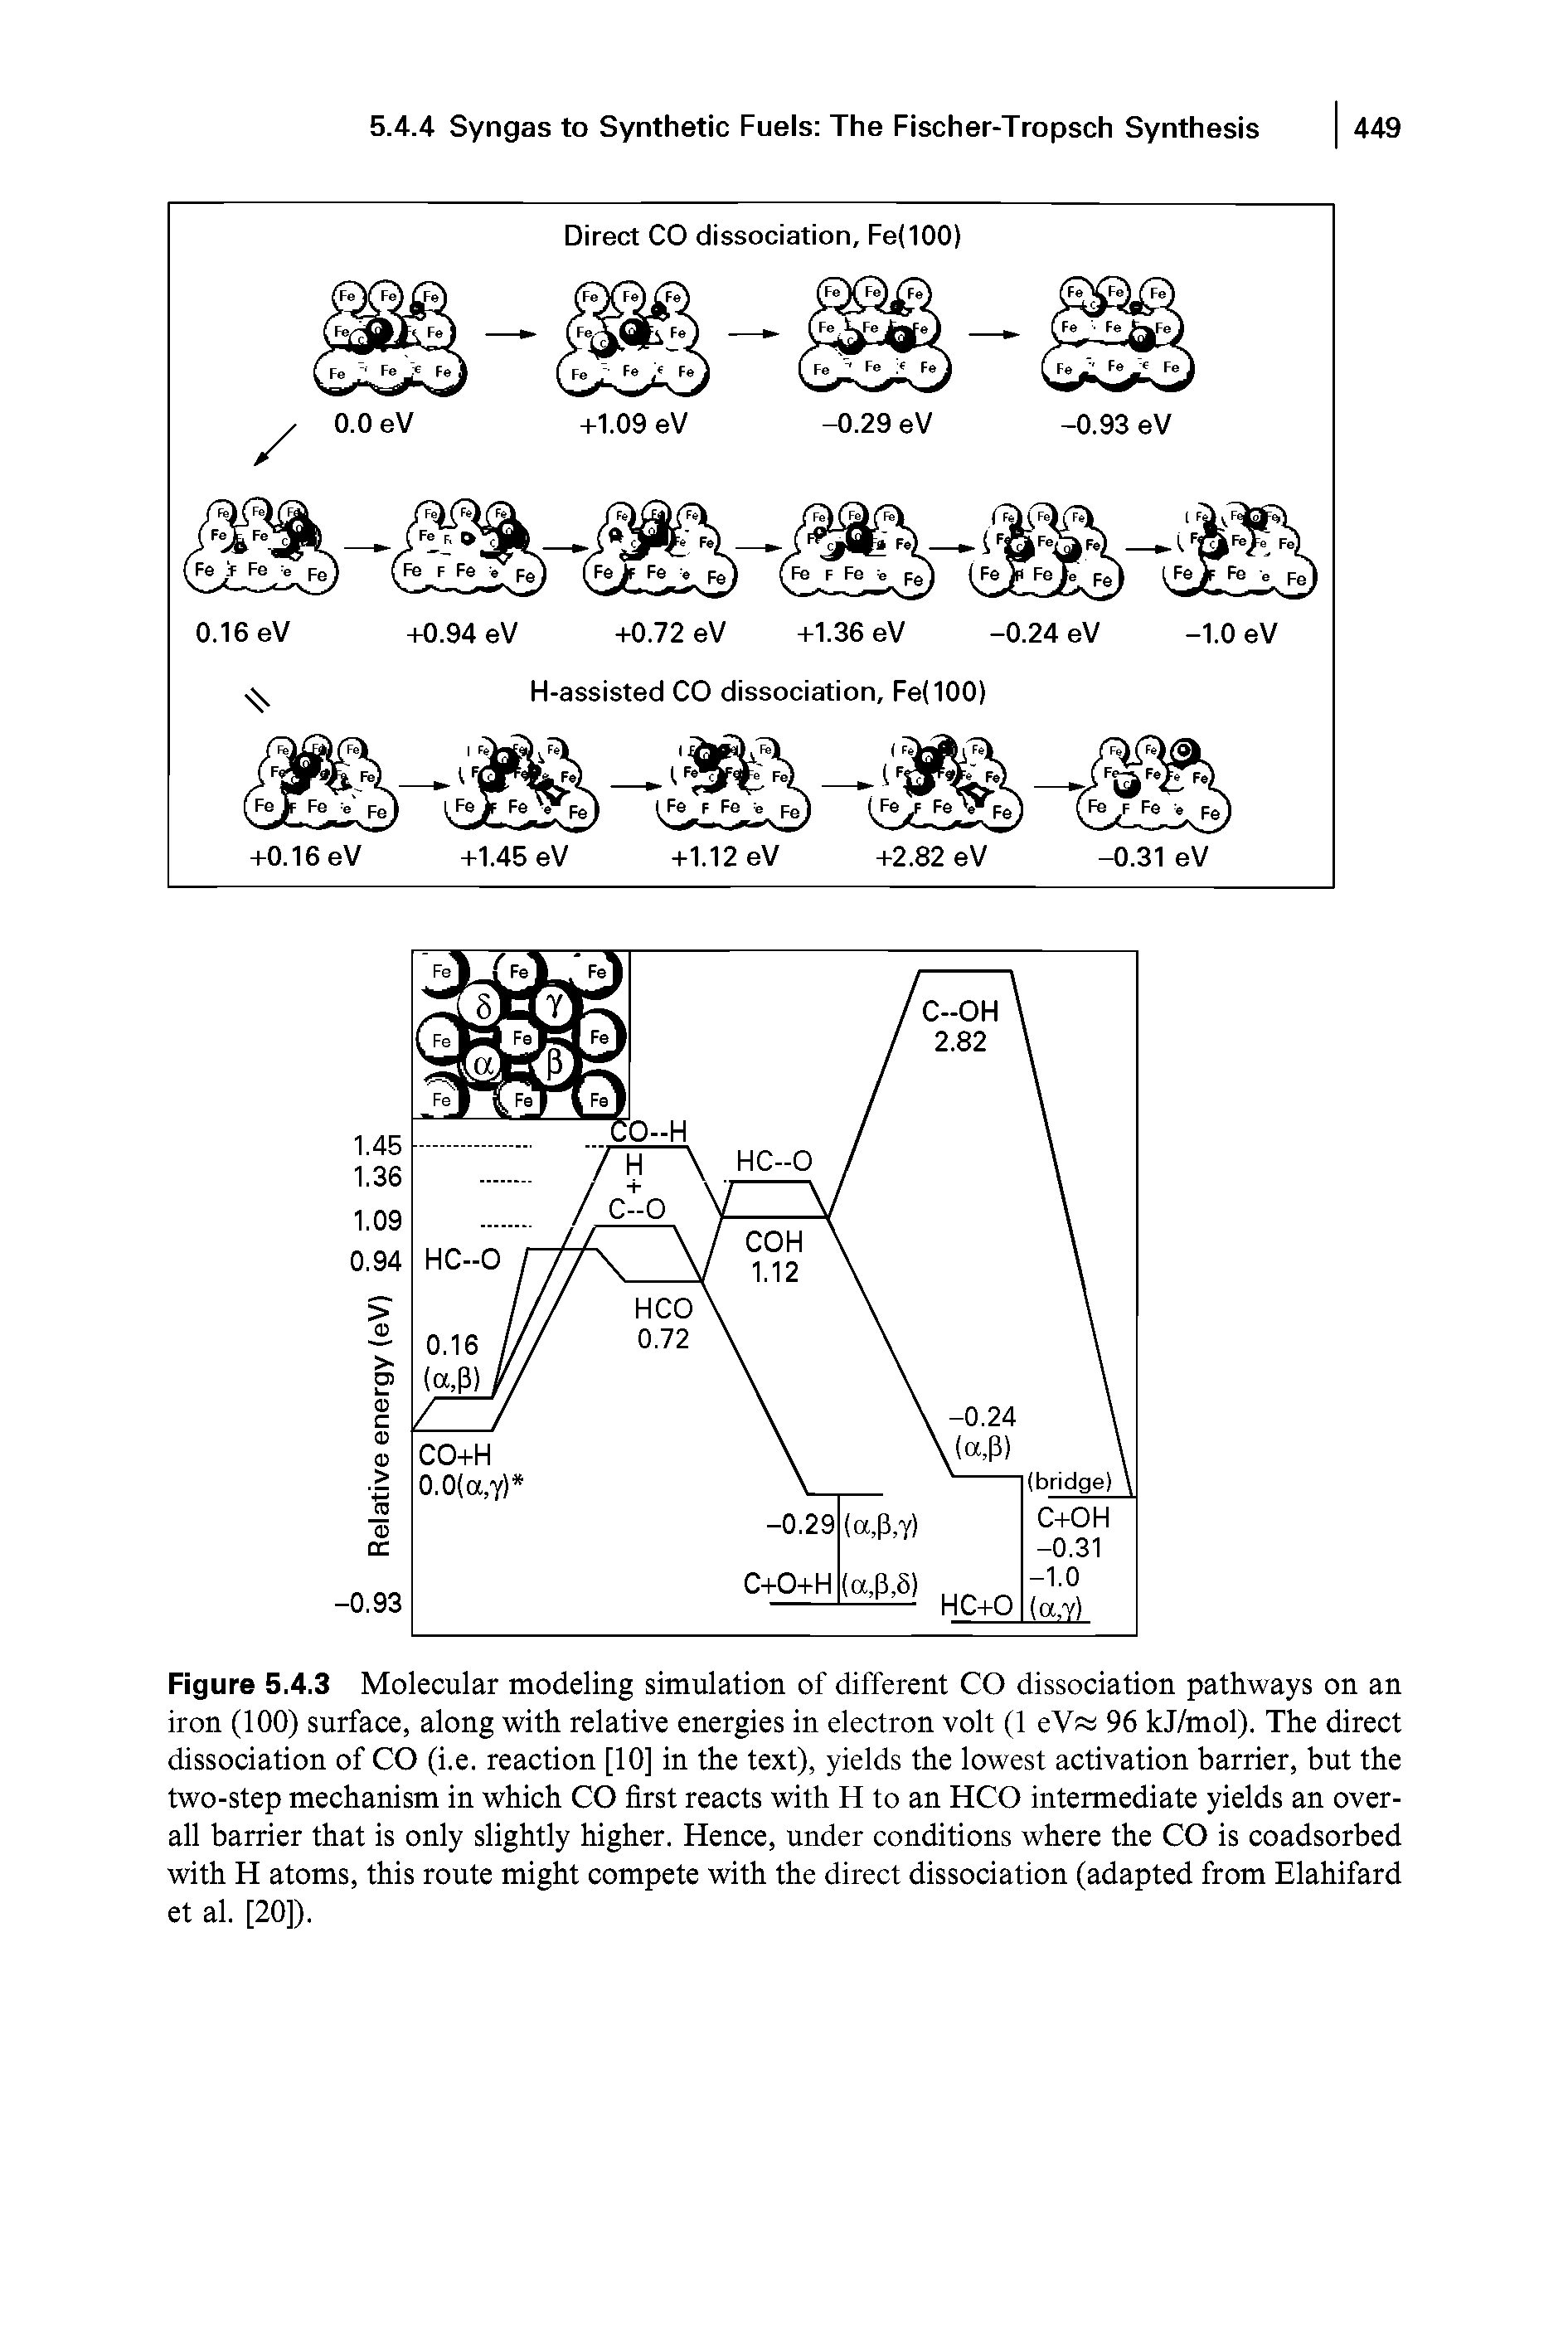 Figure 5.4.3 Molecular modeling simulation of different CO dissociation pathways on an iron (100) surface, along with relative energies in electron volt (1 eV 96 kJ/mol). The direct dissociation of CO (i.e. reaction [10] in the text), yields the lowest activation barrier, but the two-step mechanism in which CO first reacts with H to an HCO intermediate yields an overall barrier that is only slightly higher. Hence, under conditions where the CO is coadsorbed with H atoms, this route might compete with the direct dissociation (adapted from Elahifard et al. [20]).